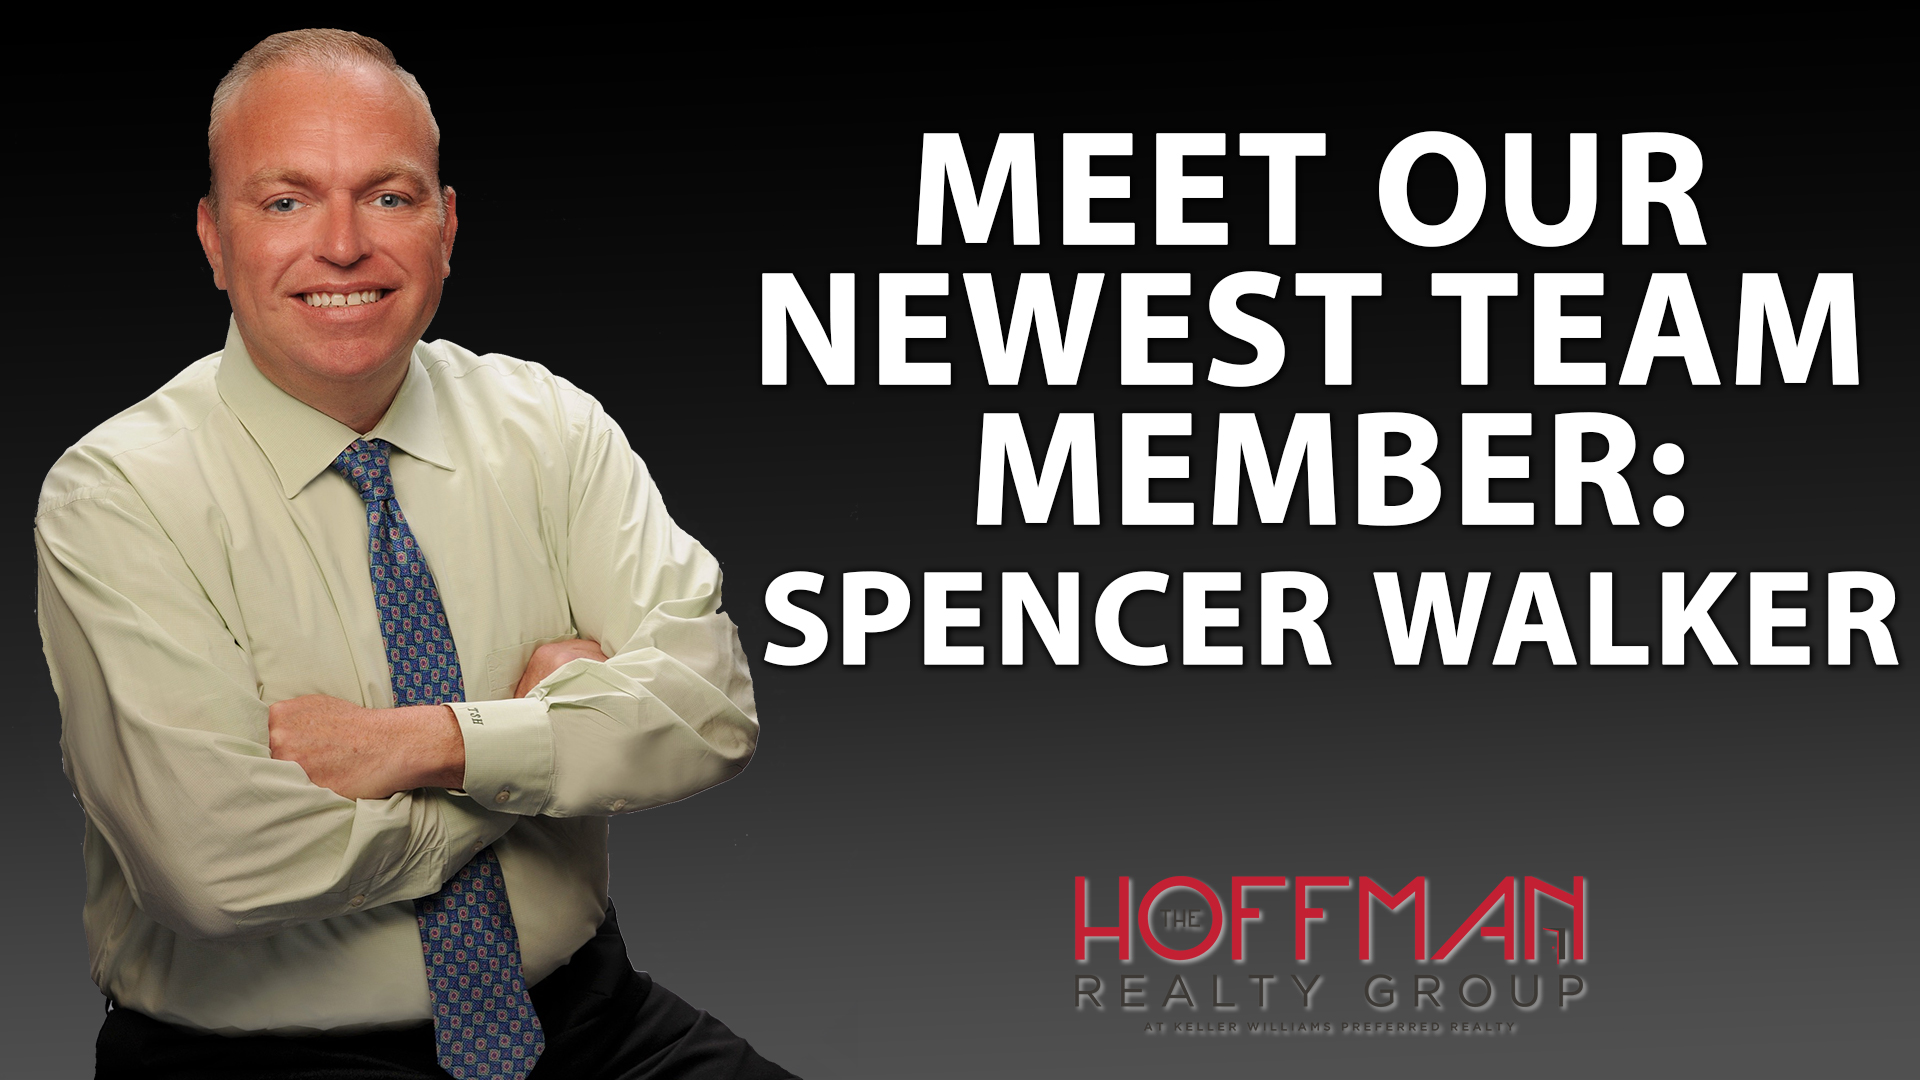 Introducing the Newest Member of Hoffman Realty Group